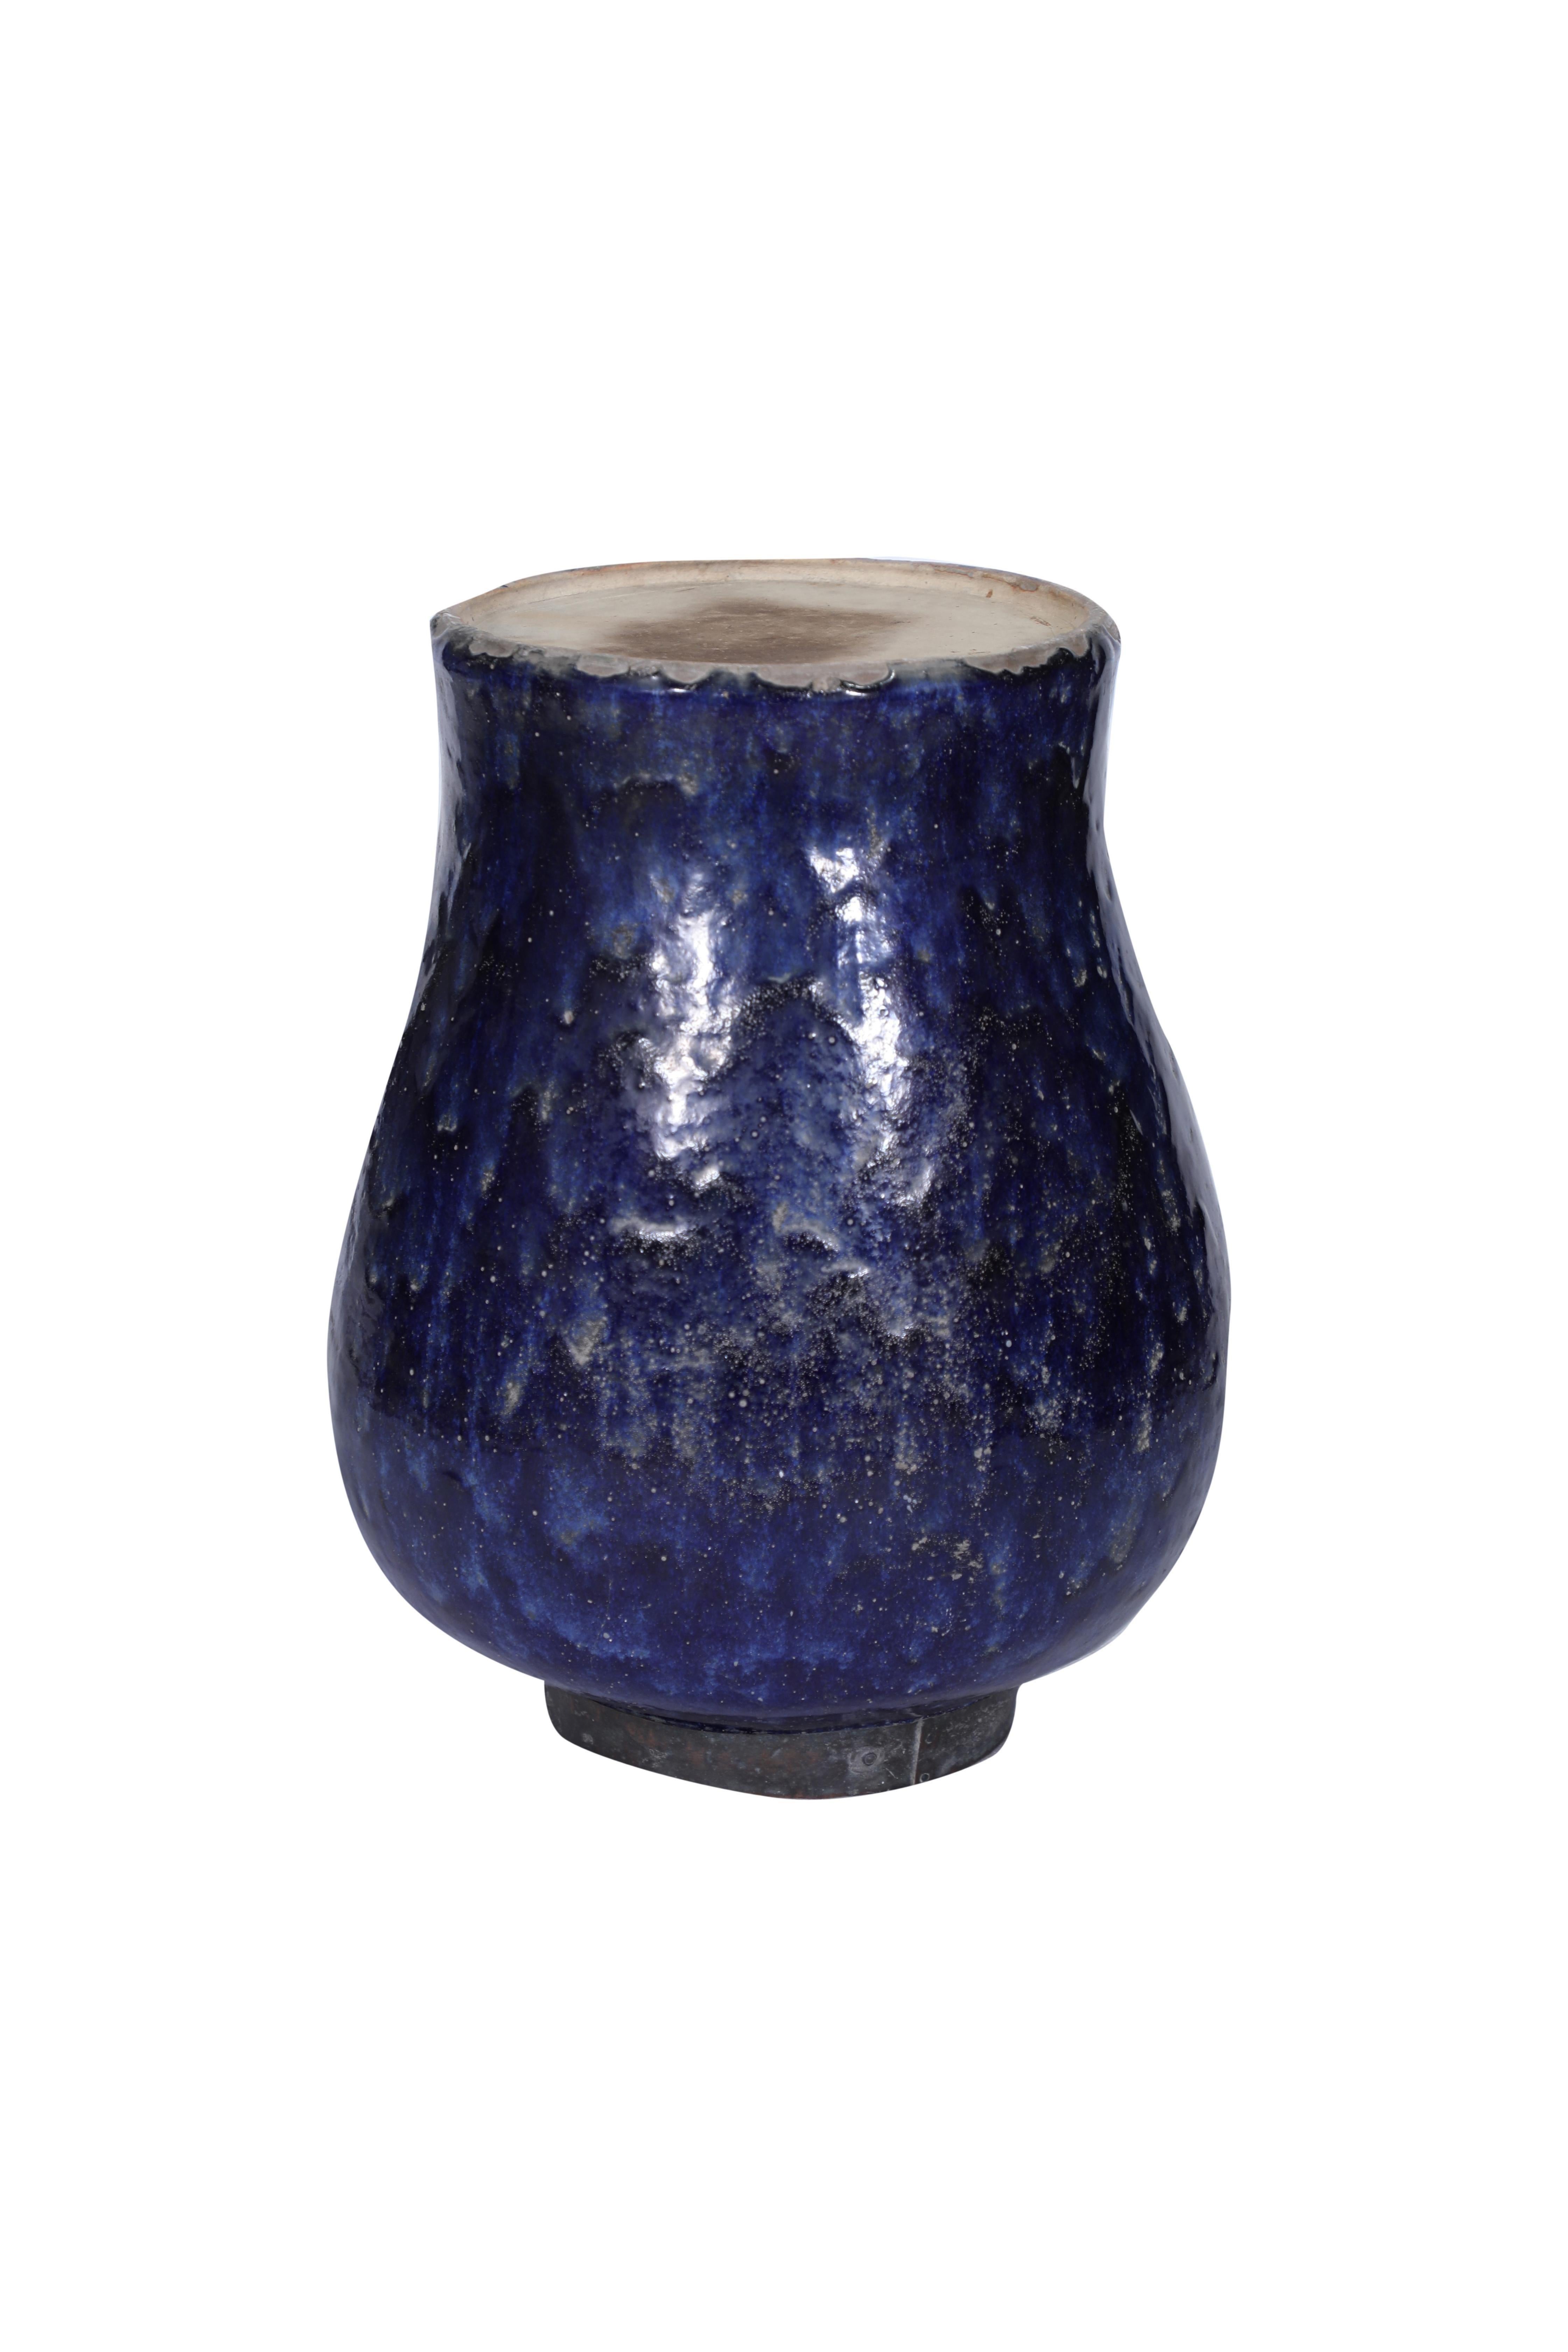 Large Cobalt Blue Ceramic Urn or Planter In Good Condition For Sale In Nantucket, MA